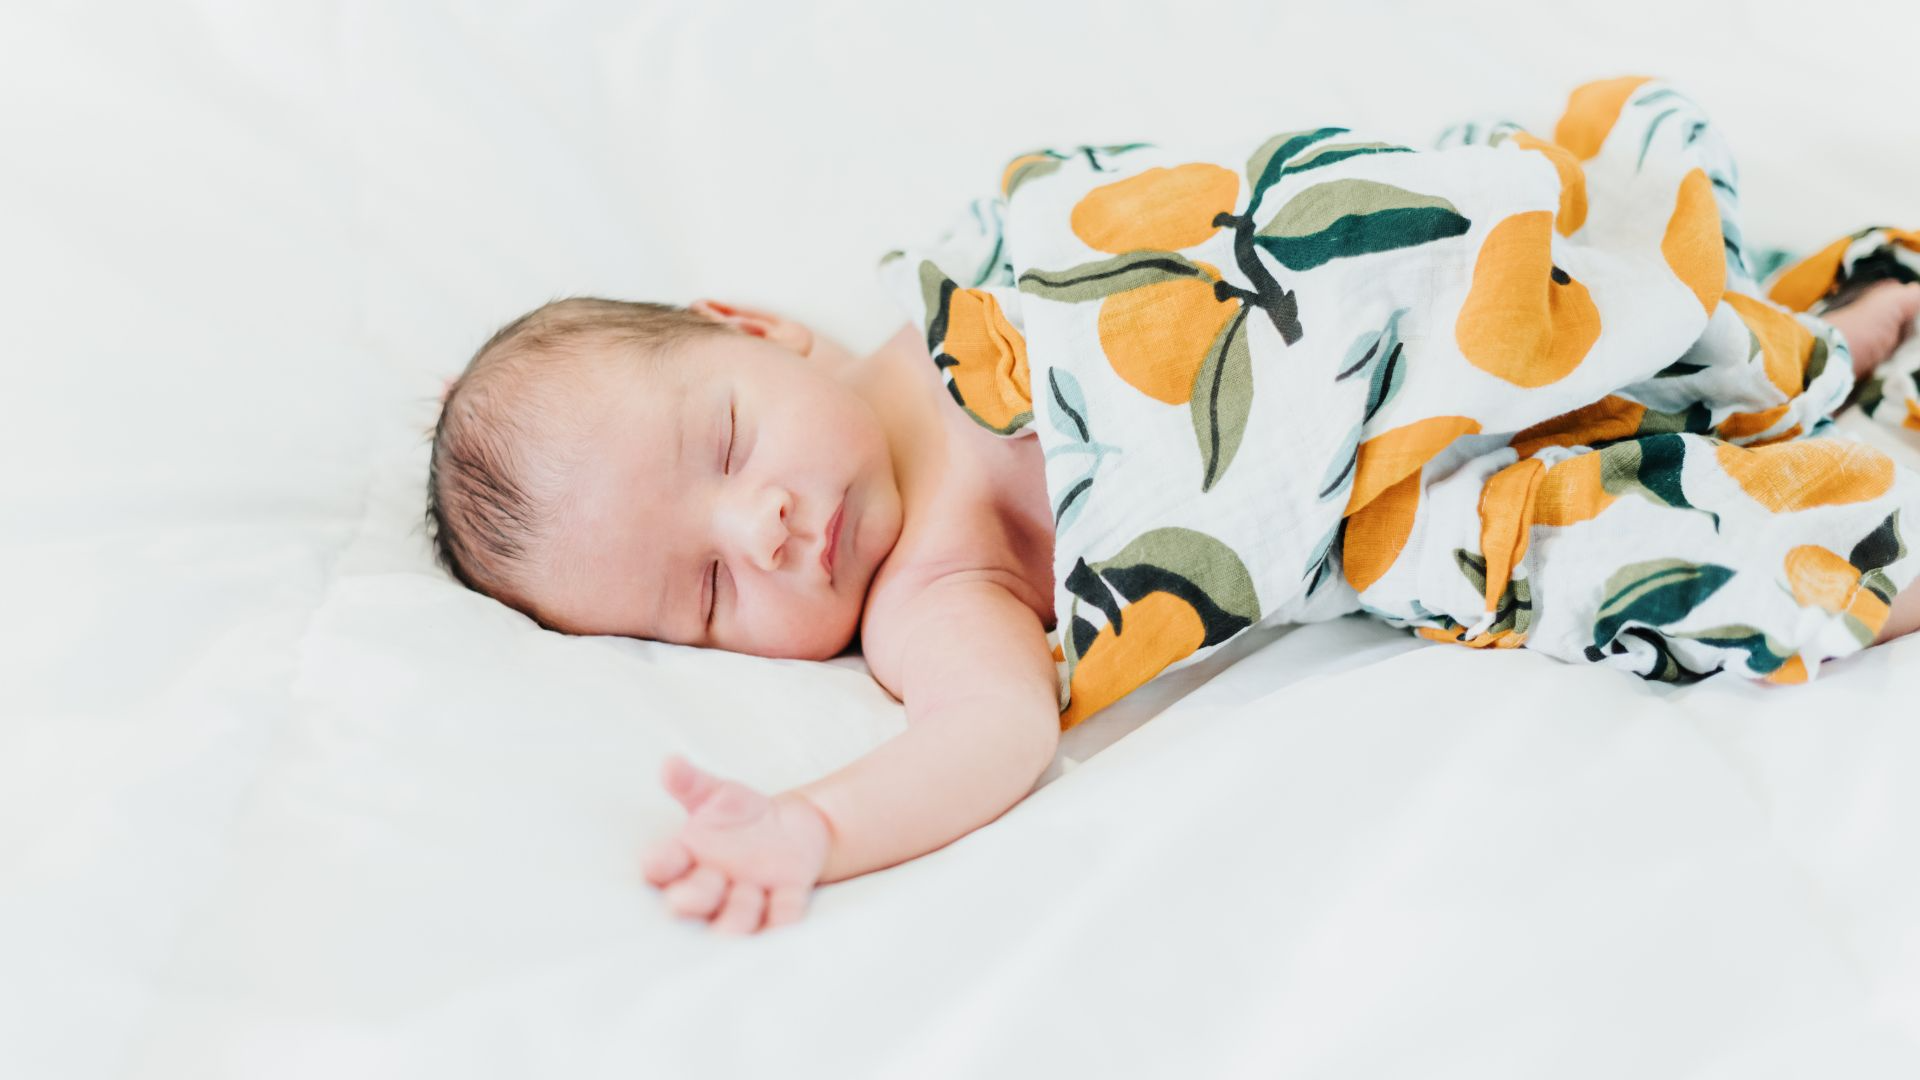 The Ultimate Guide to Choosing the Perfect Sleepwear for Your Newborn